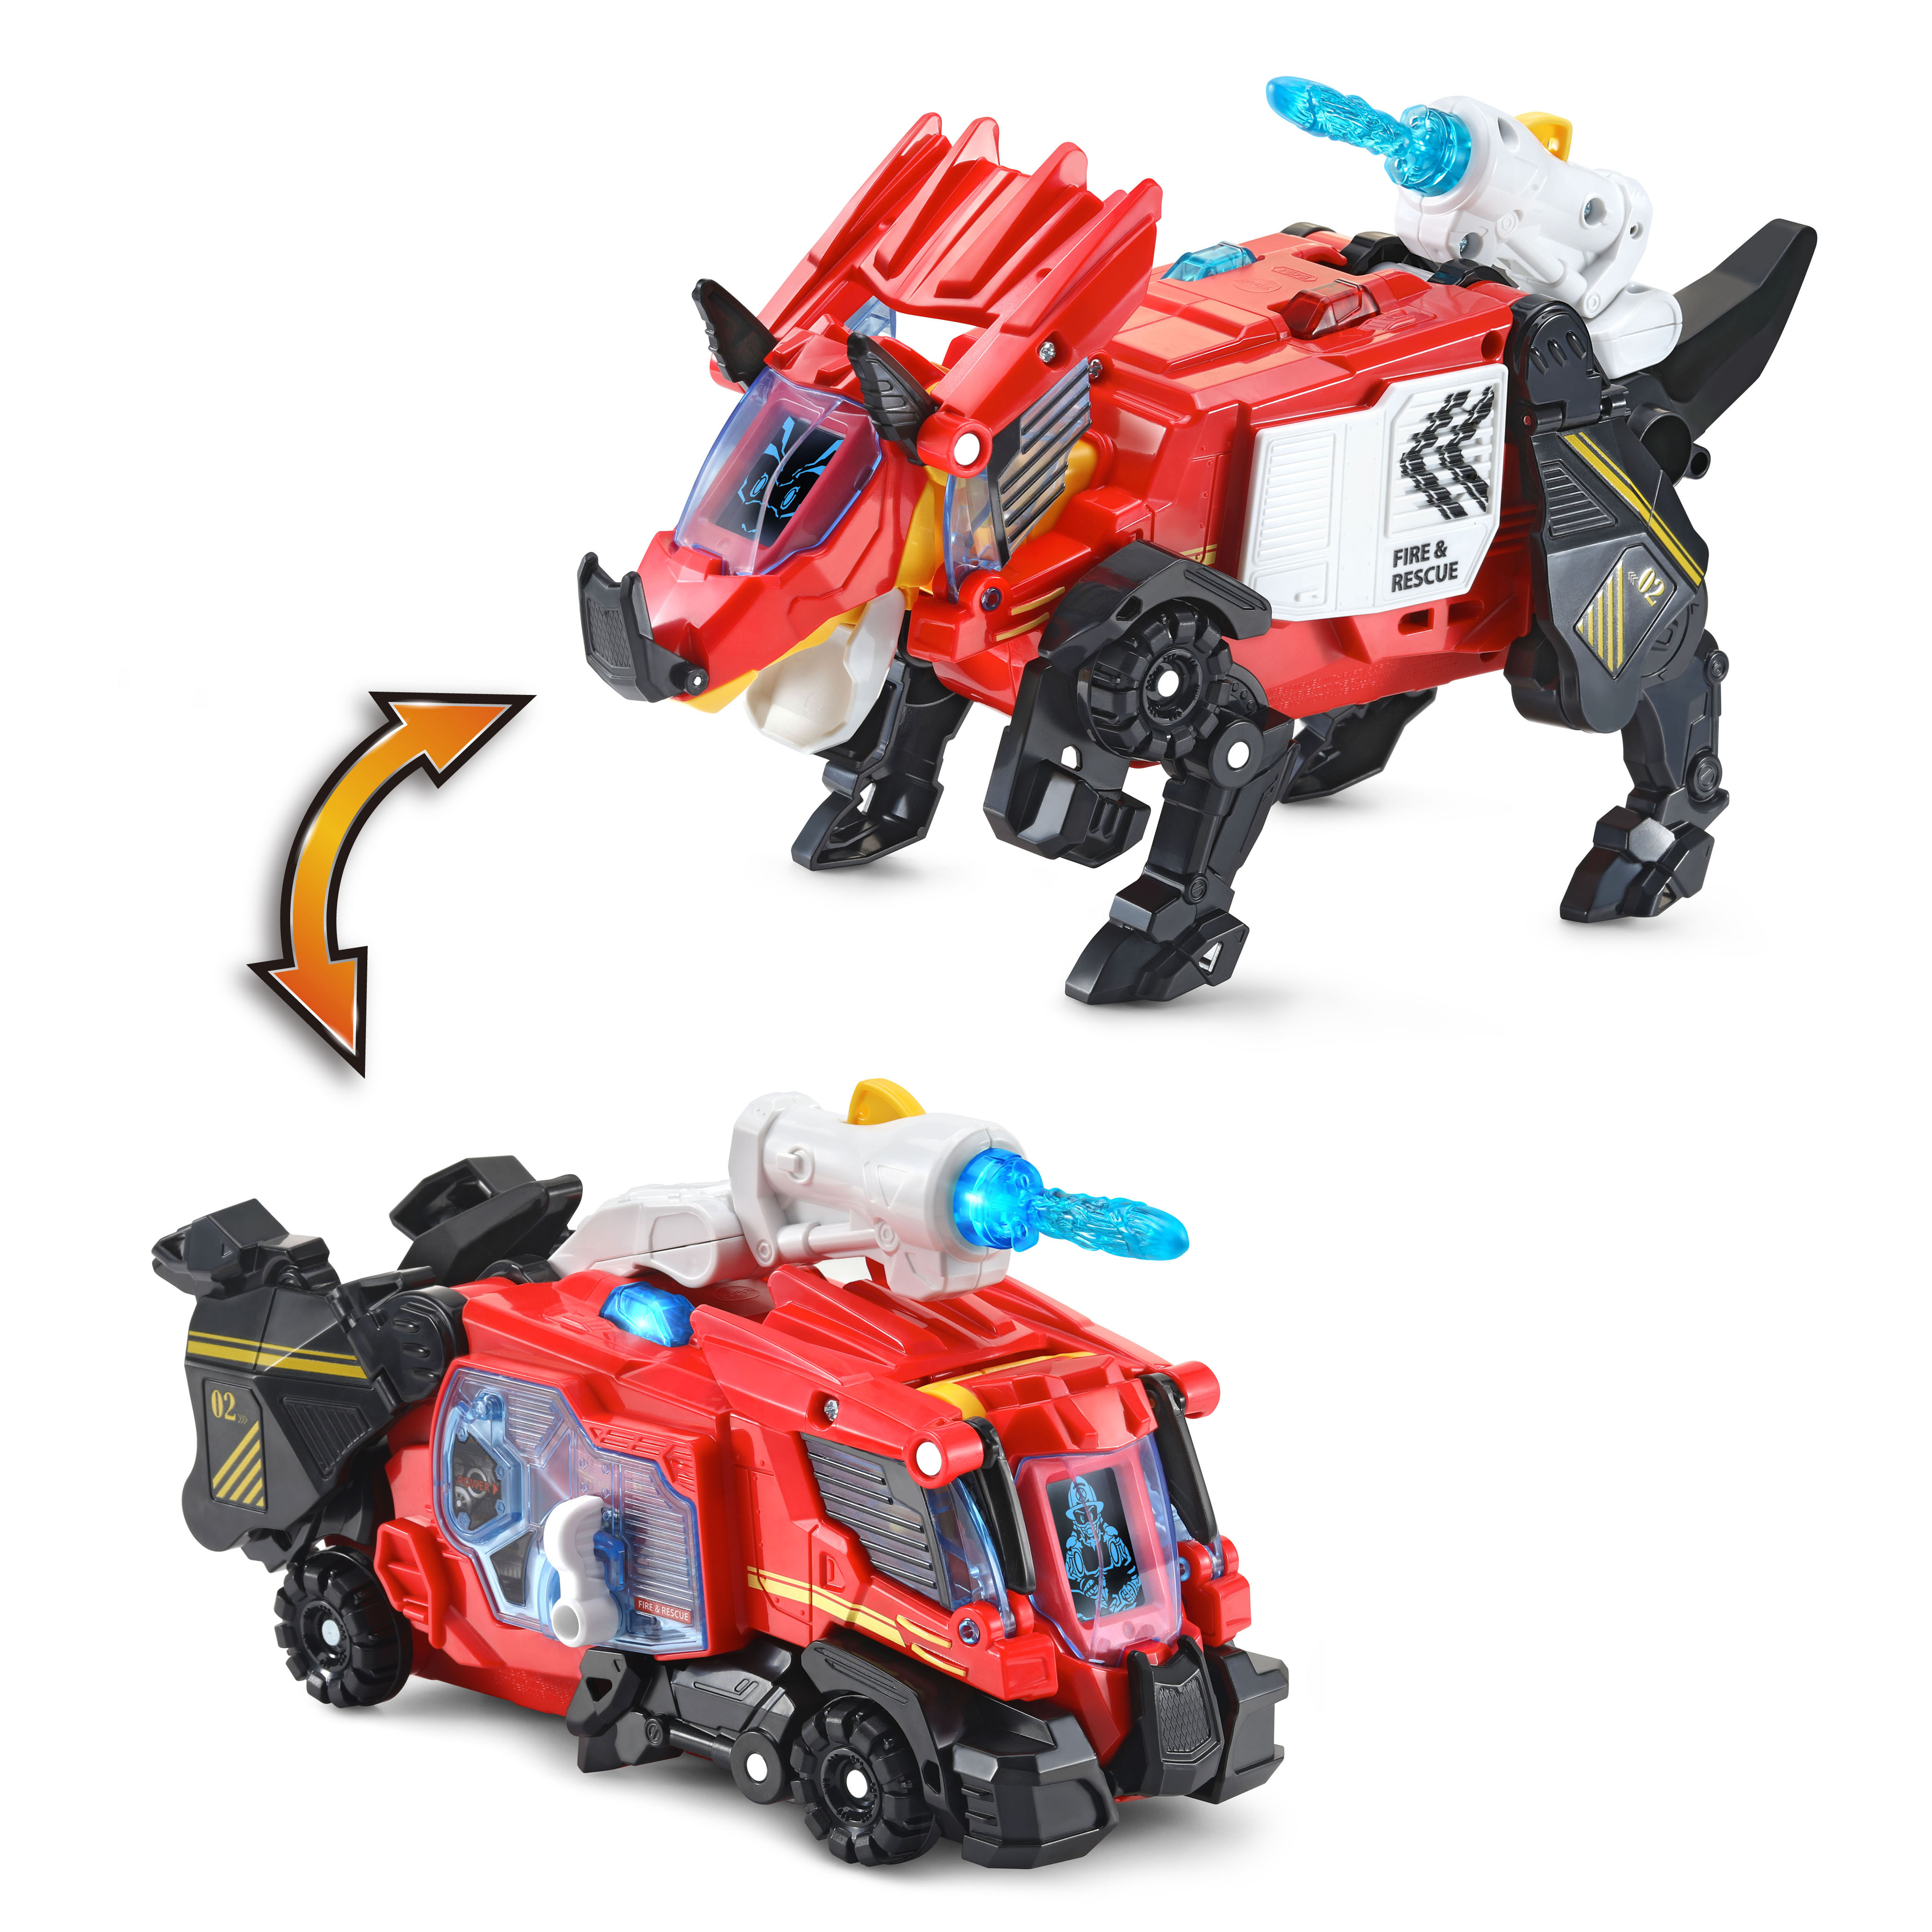 VTech Switch and Go Dinos Turbo is remote control fun for kids - ToBeThode